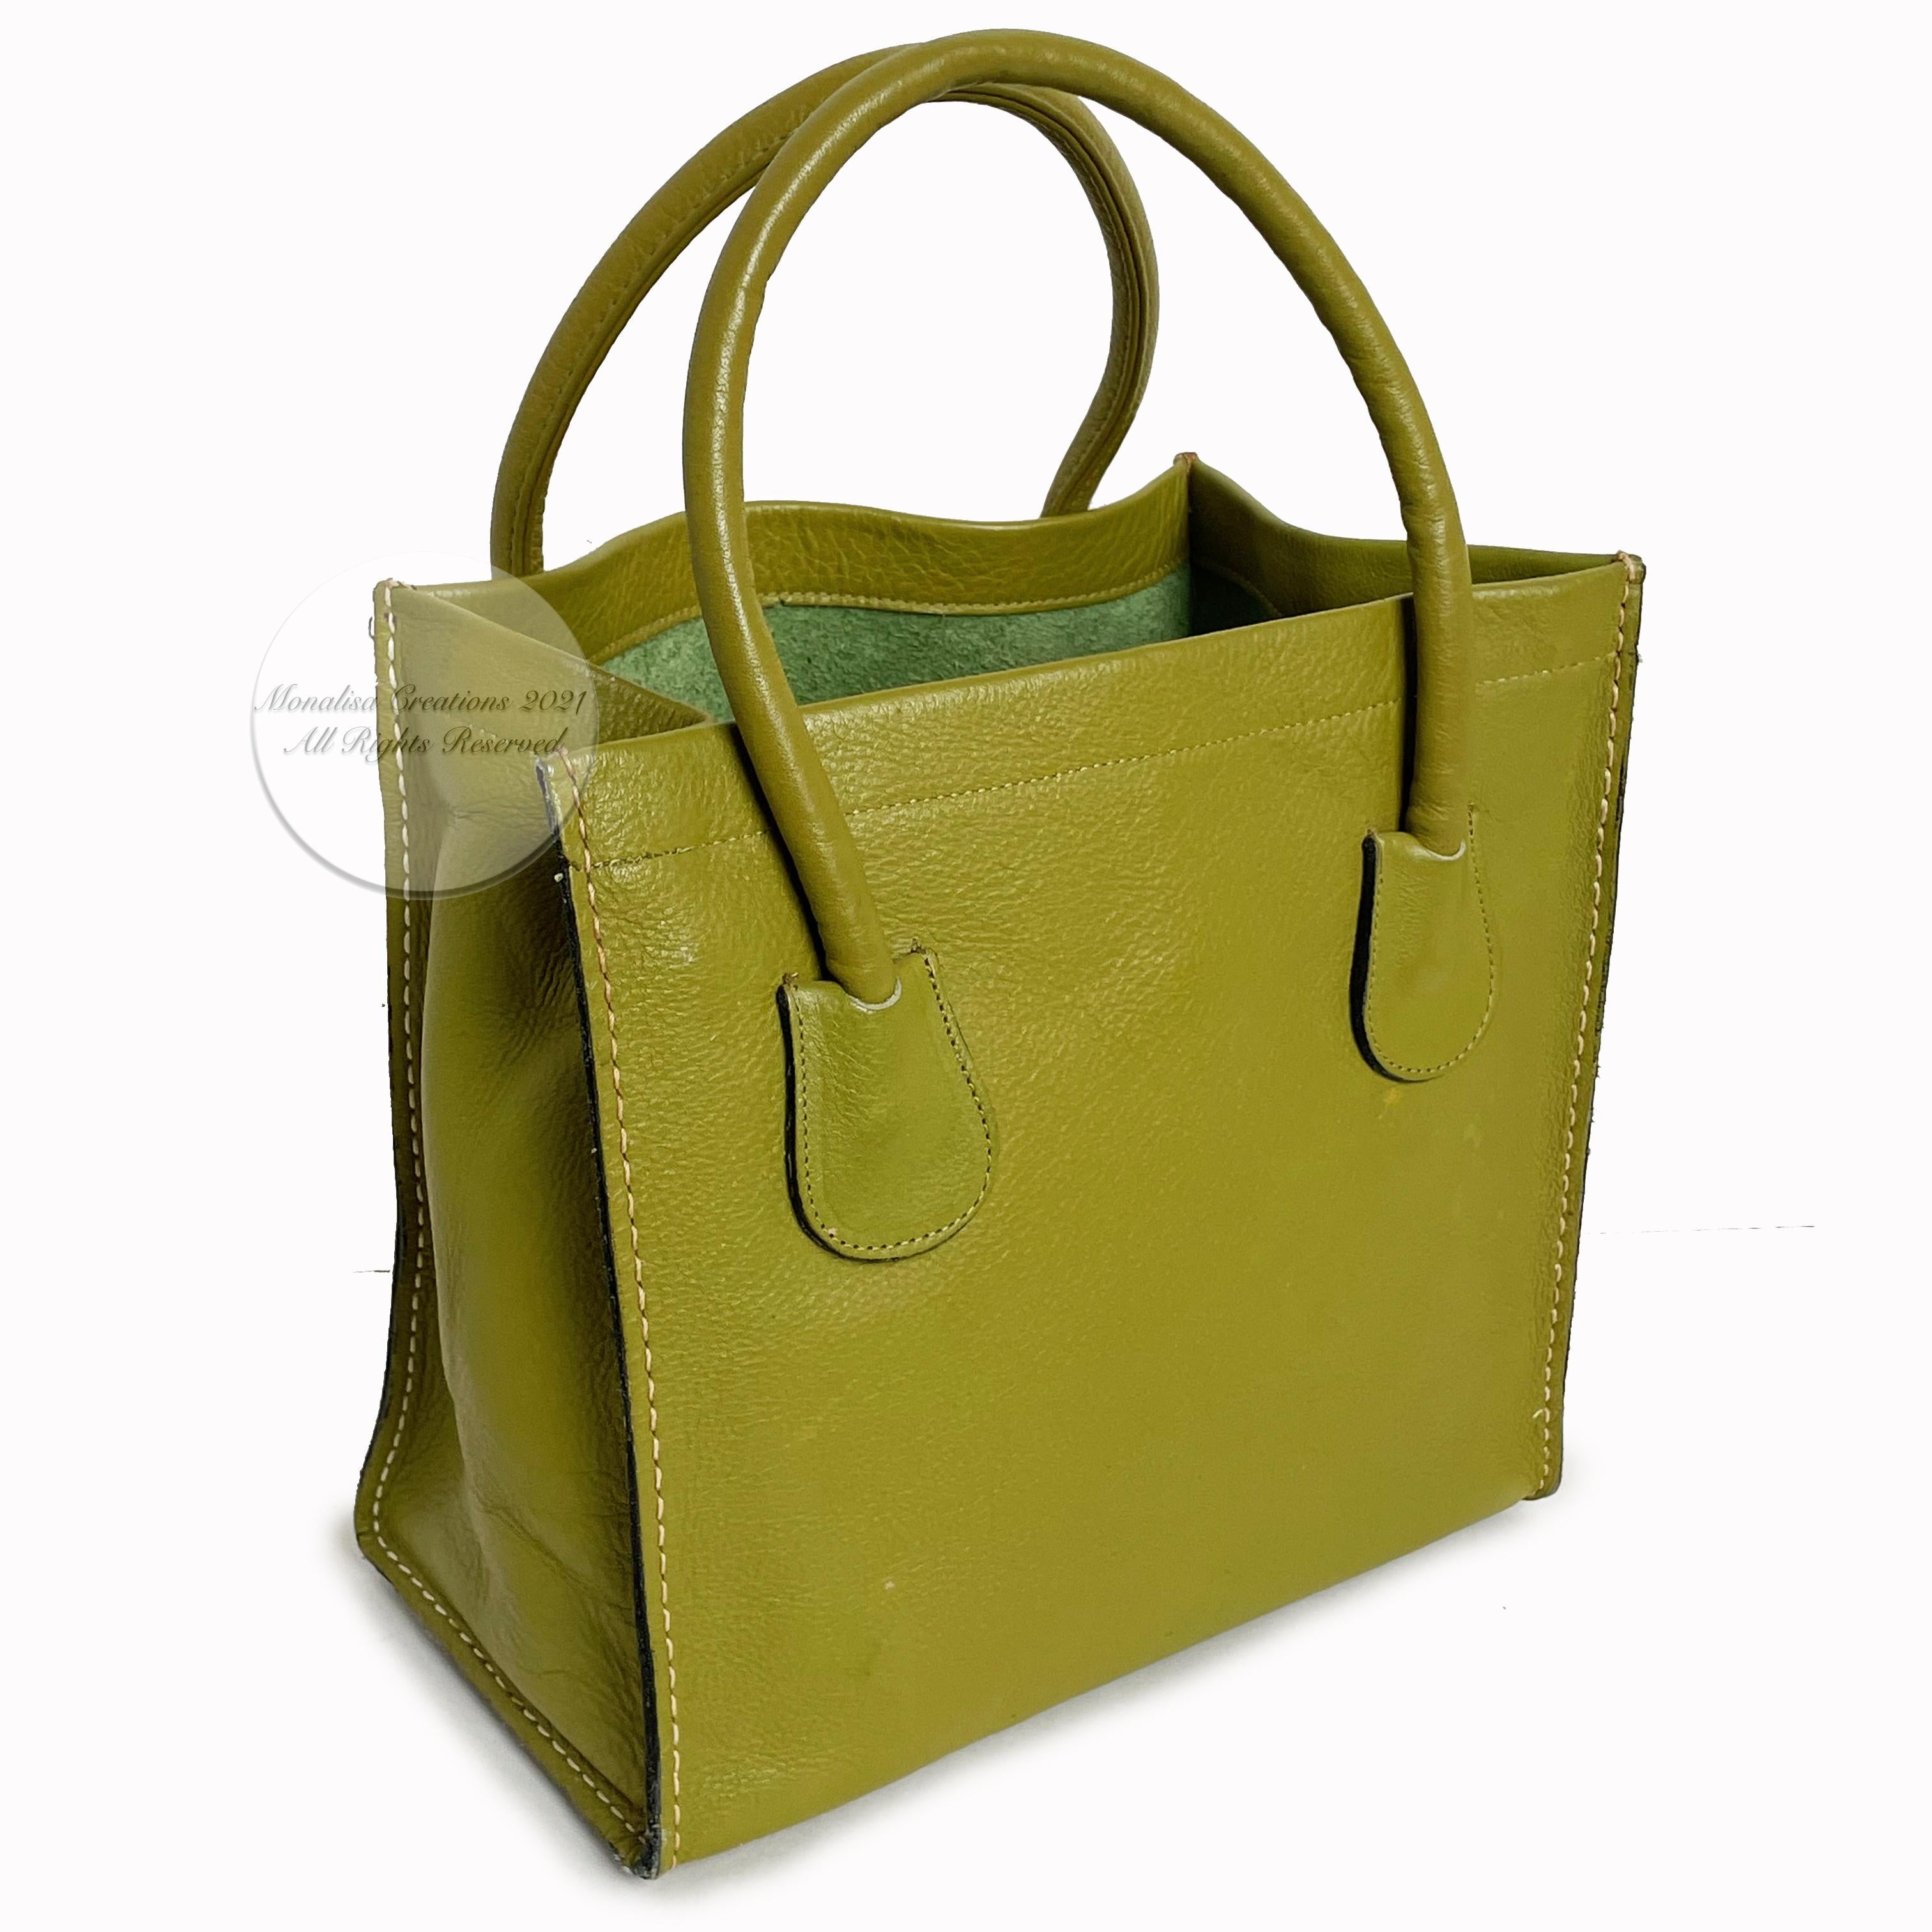 Women's Bonnie Cashin for Coach Dinky Tote Bag Cashin Carry Lime Green Leather 60s NYC 